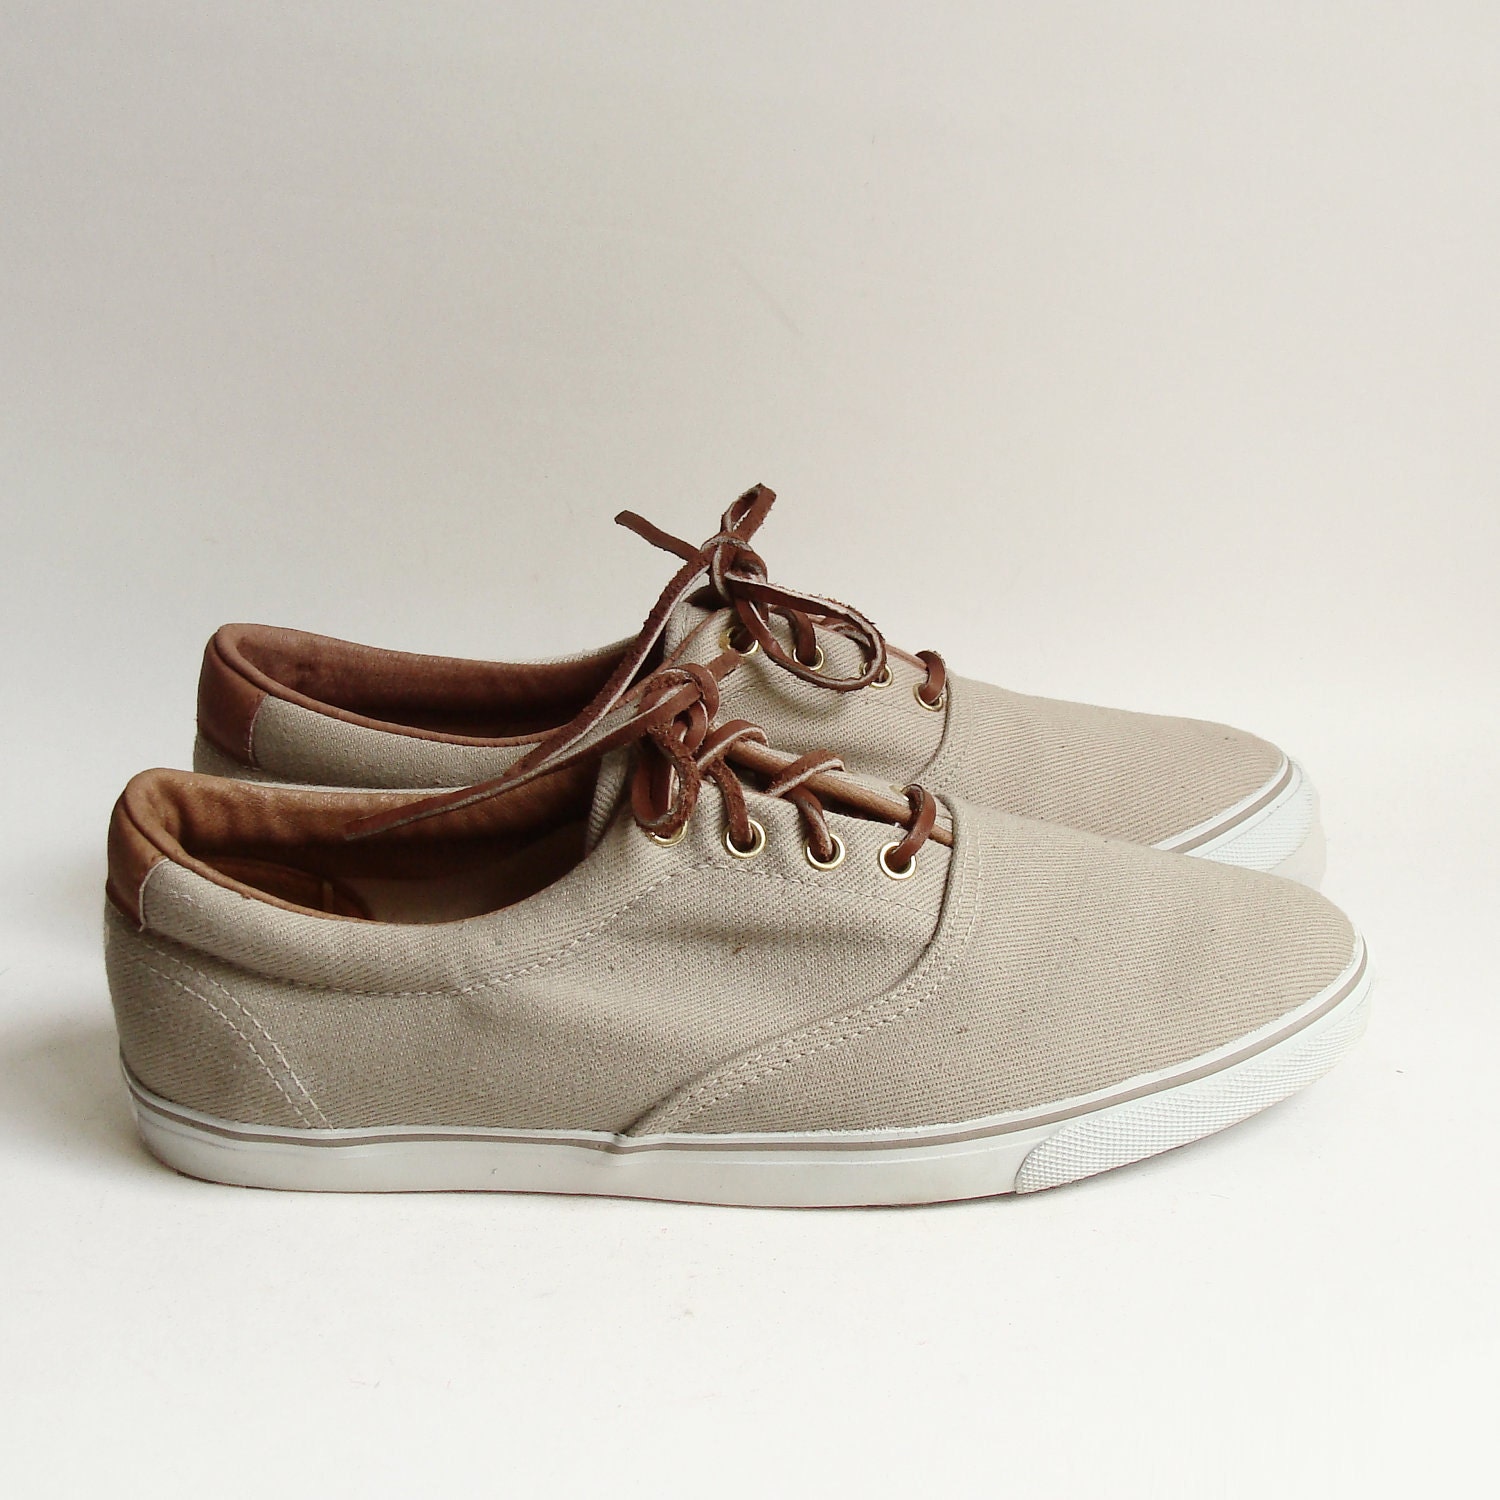 shoes 9.5 / tan canvas boat shoes / 80s 1980s preppy topsiders